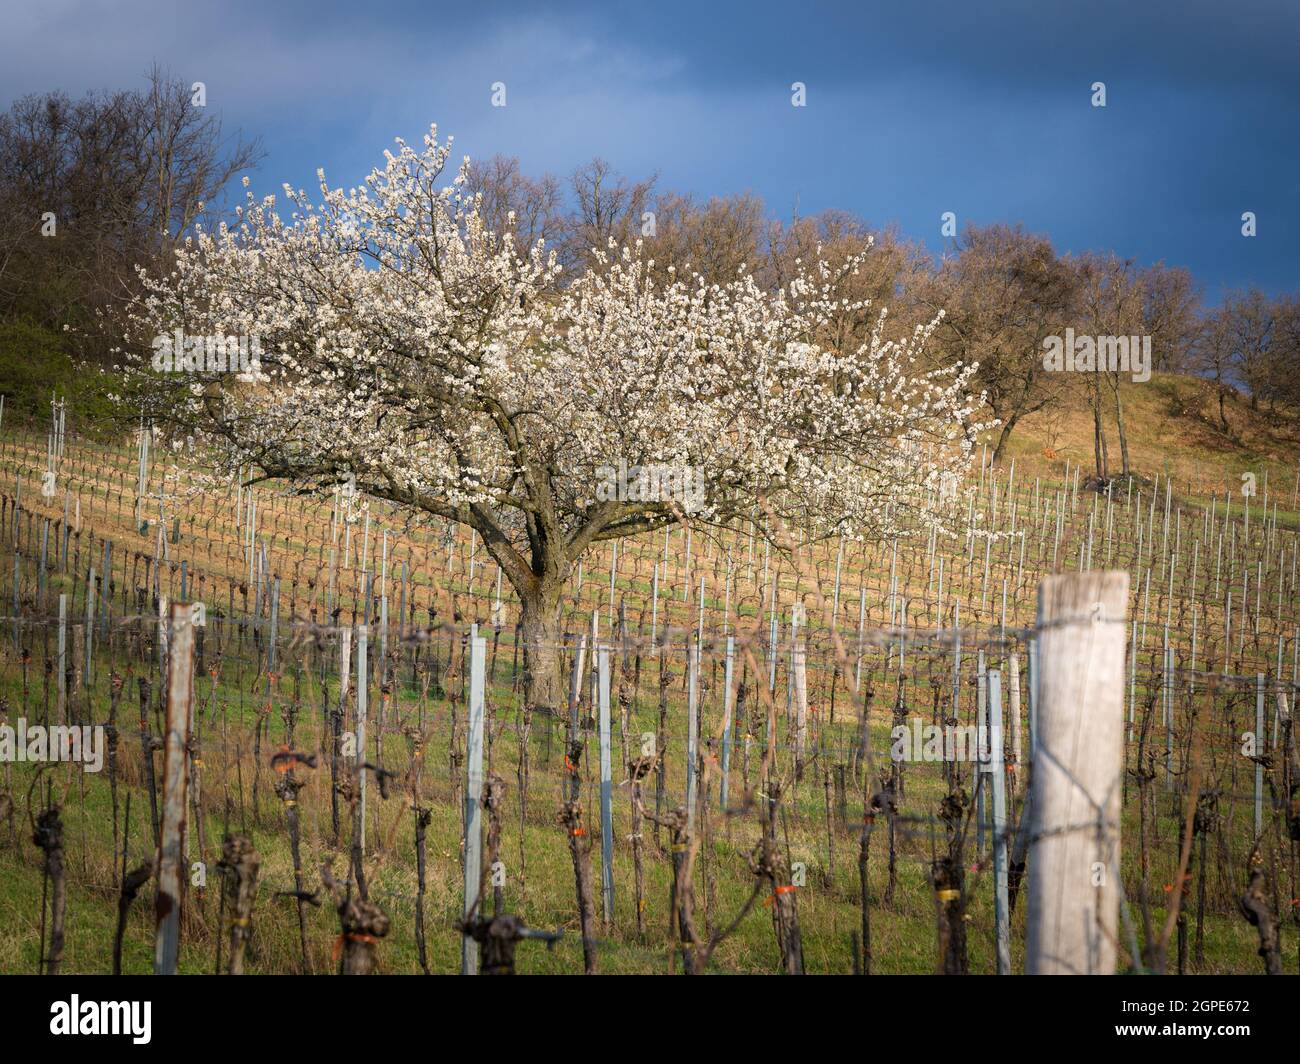 Blooming cherry tree in a vineyard, Donnerskirchen, North Burgenland, Austria. The region between the hills of Leithagebirge and lake Neusiedl is famo Stock Photo